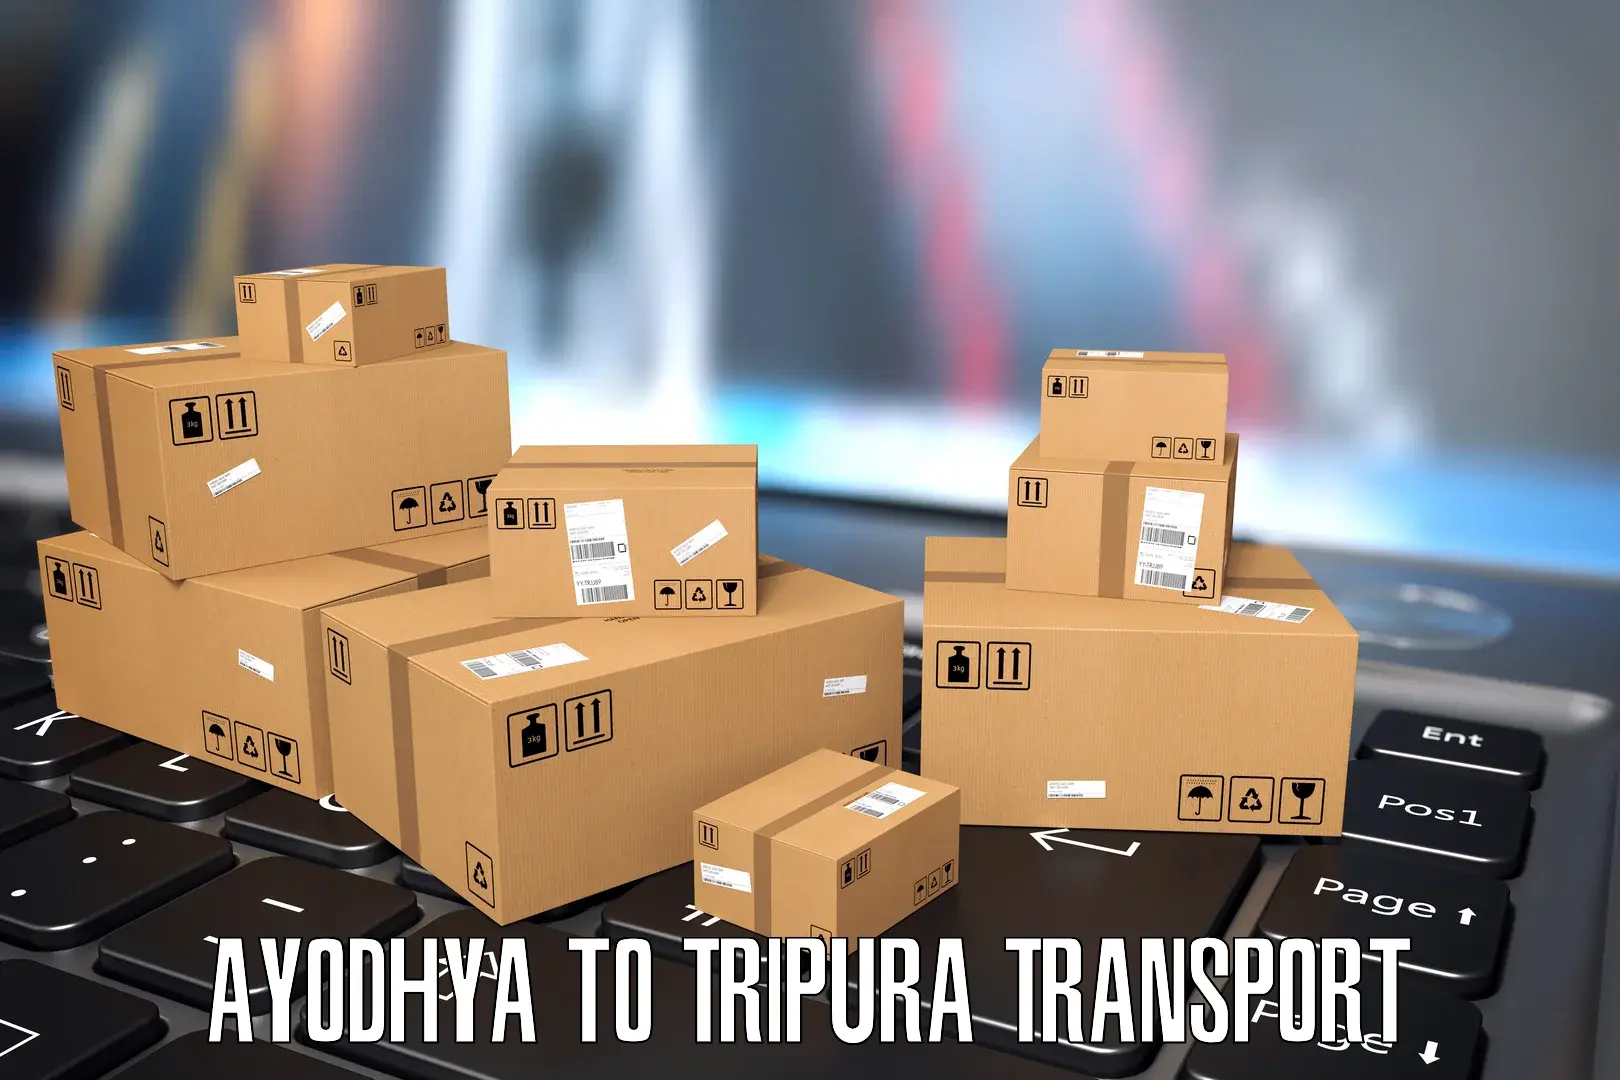 Domestic transport services Ayodhya to Udaipur Tripura